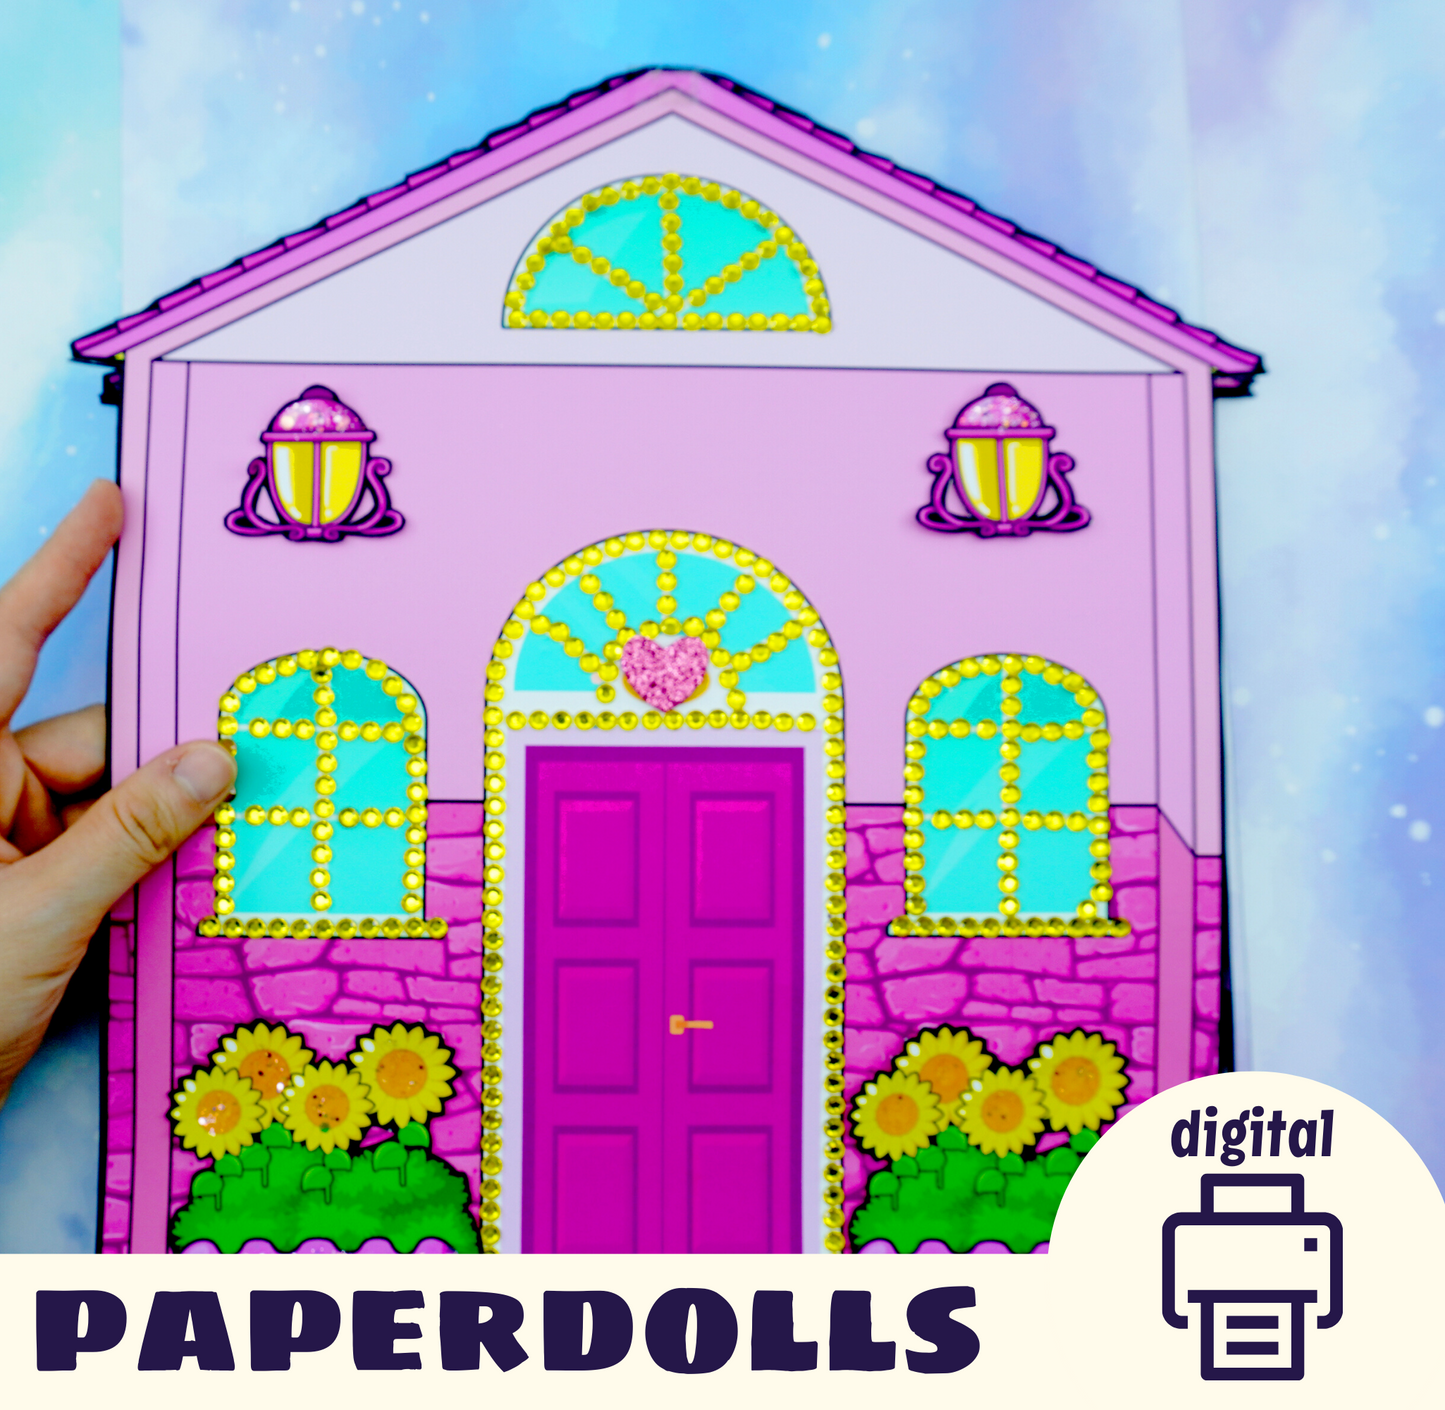 Little Pink Barbie Doll and Barbie closet 🎀 24 pages Paper Doll PDF Printable DIY set for kids | Busy book for kids Paper Doll House | DIY crafts for kids | Woa Doll Crafts